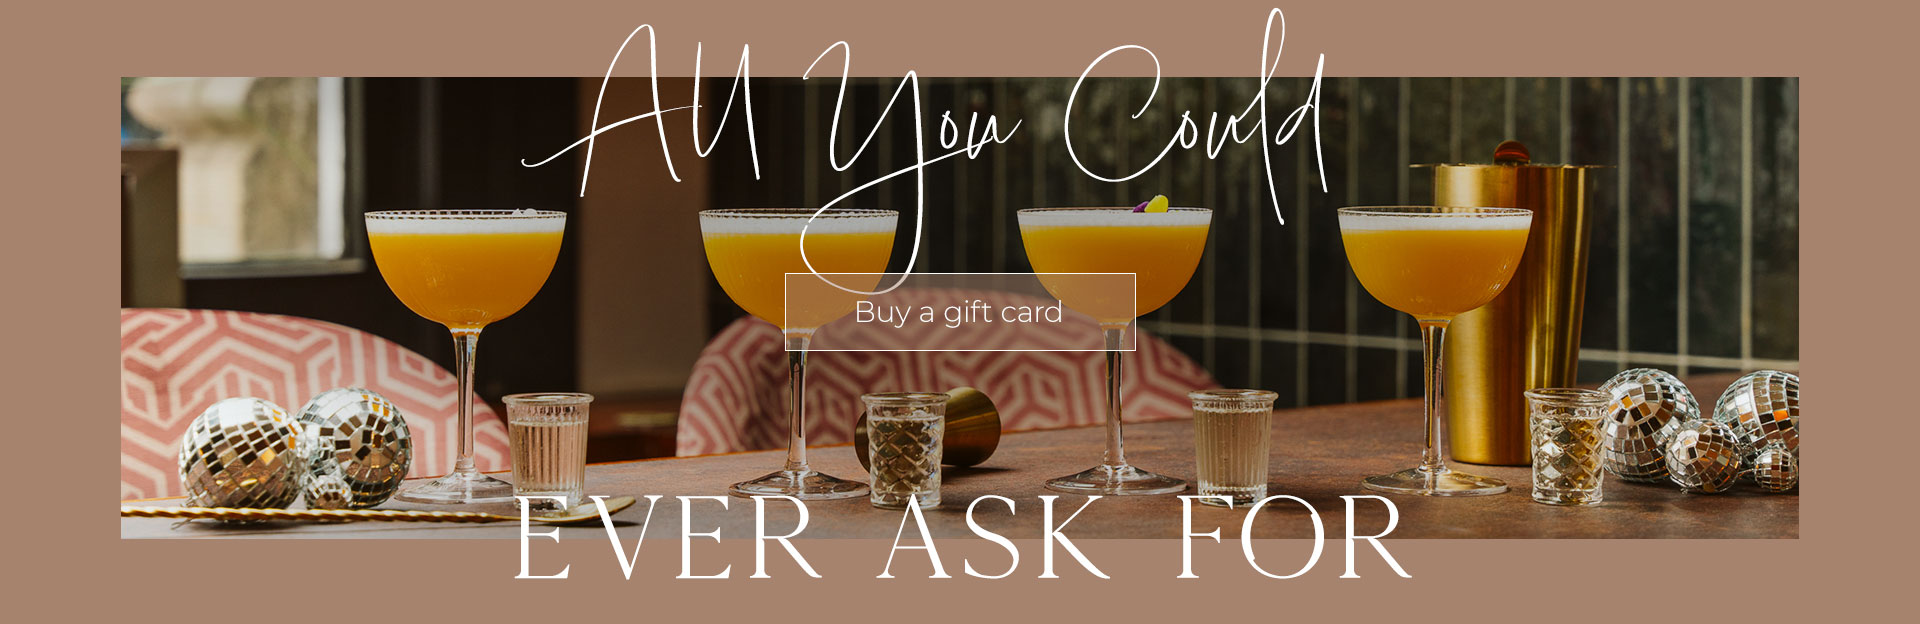 All Bar One Gift Cards at All Bar One Victoria